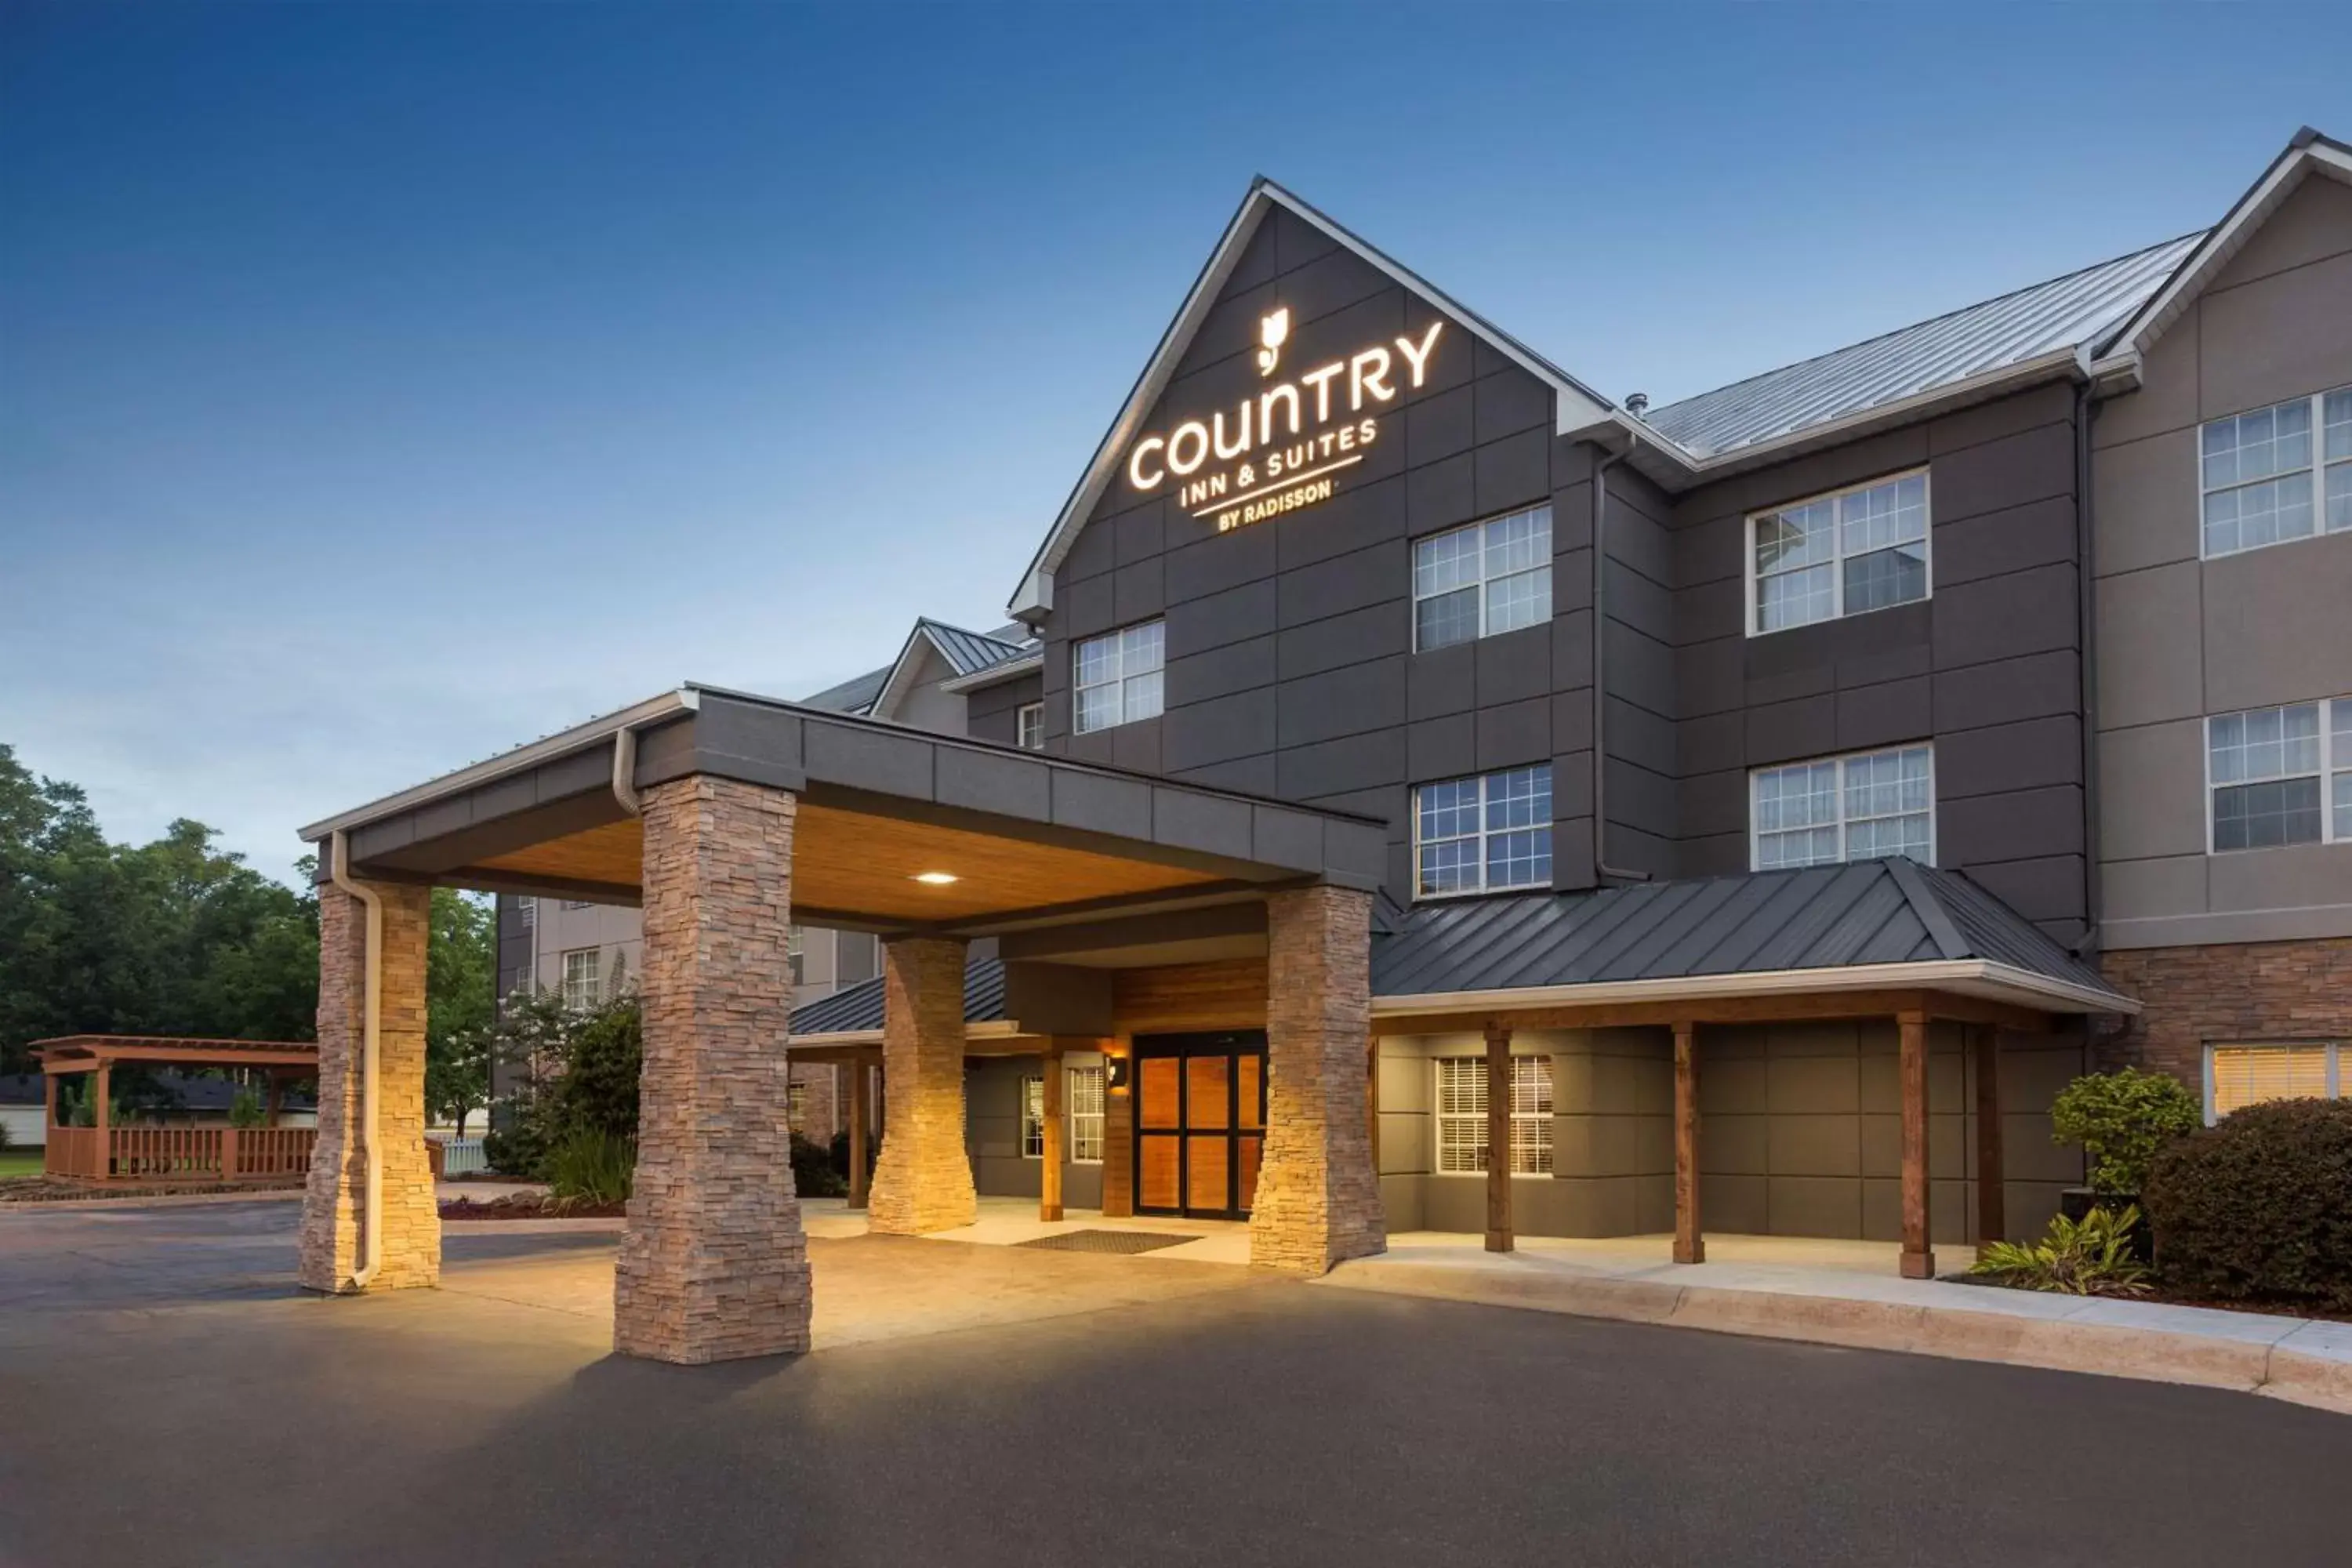 Property building in Country Inn & Suites by Radisson, Jackson-Airport, MS